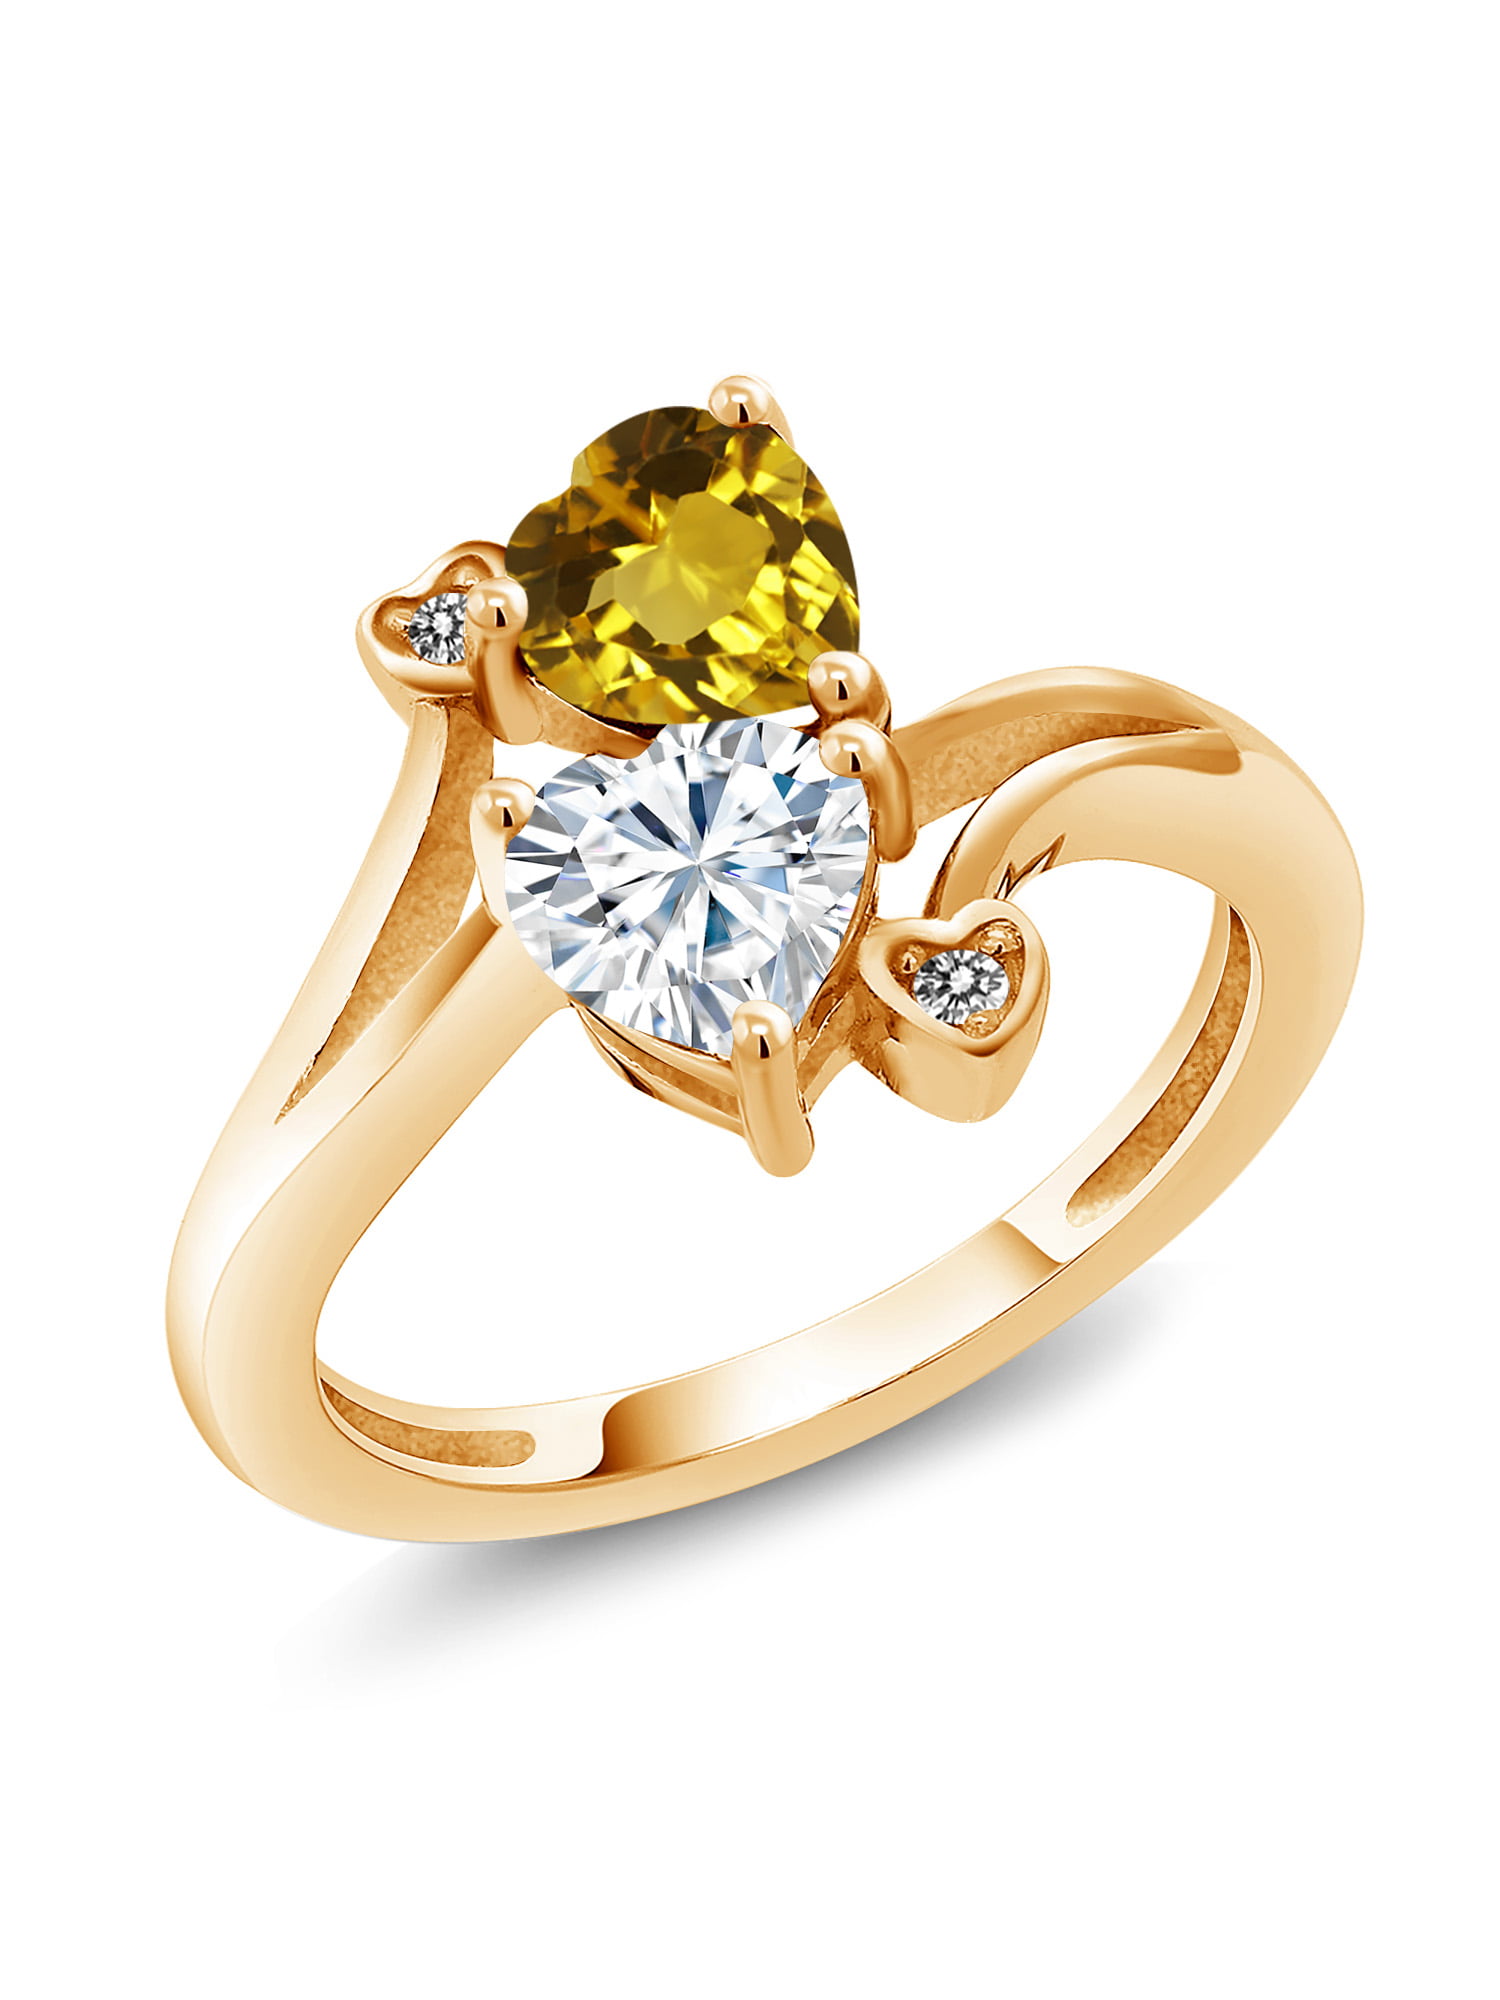 Details about   Citrine Gemstone Party Jewelry 10k Yellow Gold Ring